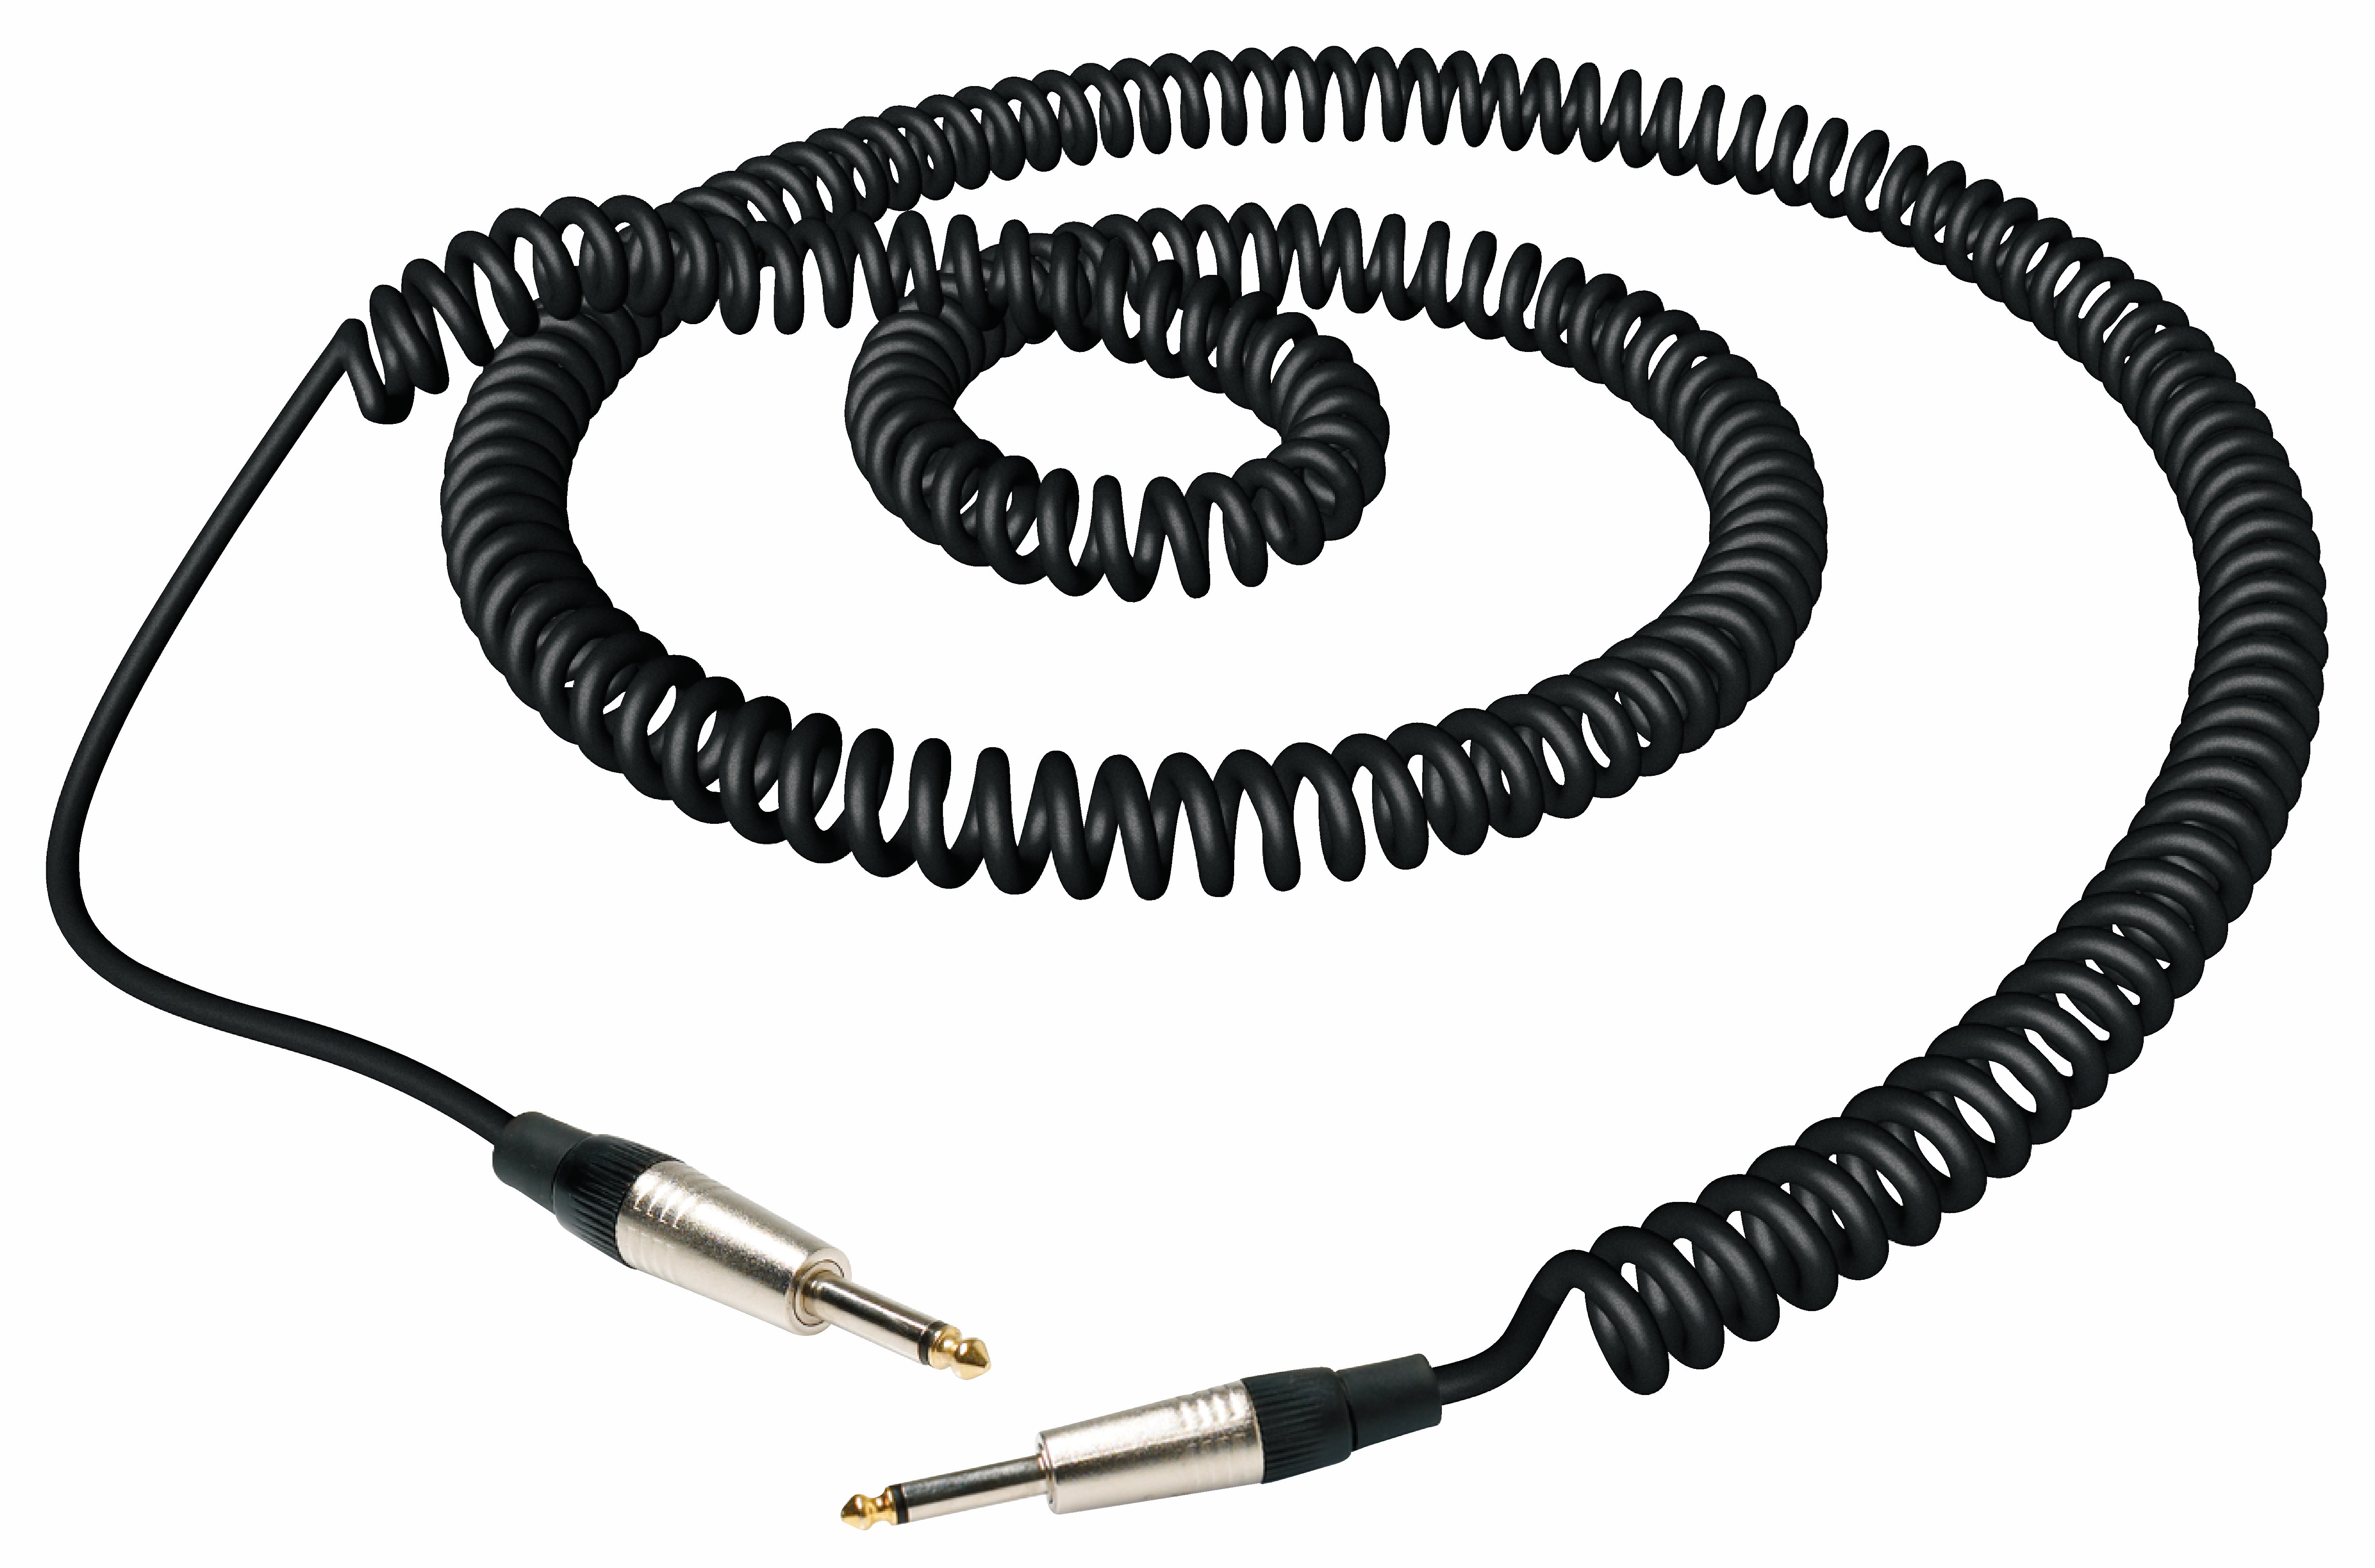 RockCable Instrument Cable - straight TS (6.3 mm / 1/4"), Coiled, 5 m / 16.4 ft - Black